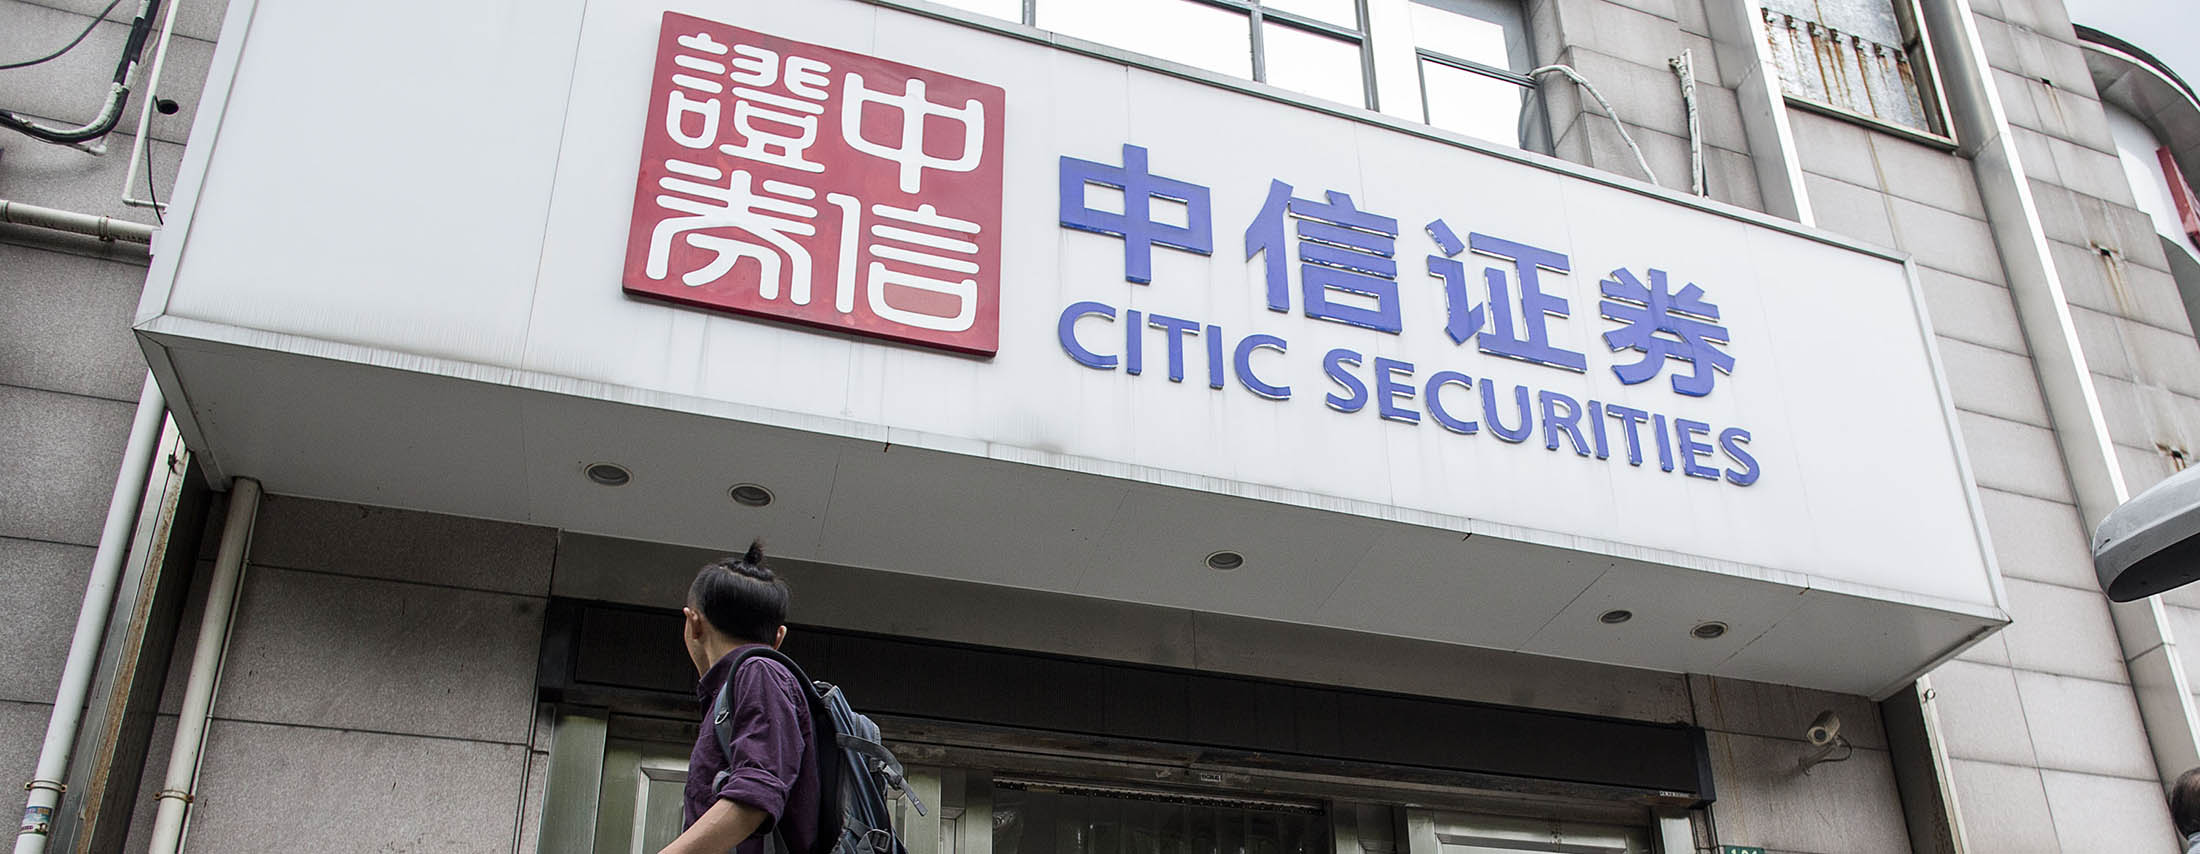 A pedestrian walks past a Citic Securities Co. branch in Shanghai, China, on Wednesday, Sept. 16, 2015. The president of China's biggest brokerage has been swept up in a widening campaign to root out financial wrongdoing and assign blame for the nation's $5 trillion stock rout.
